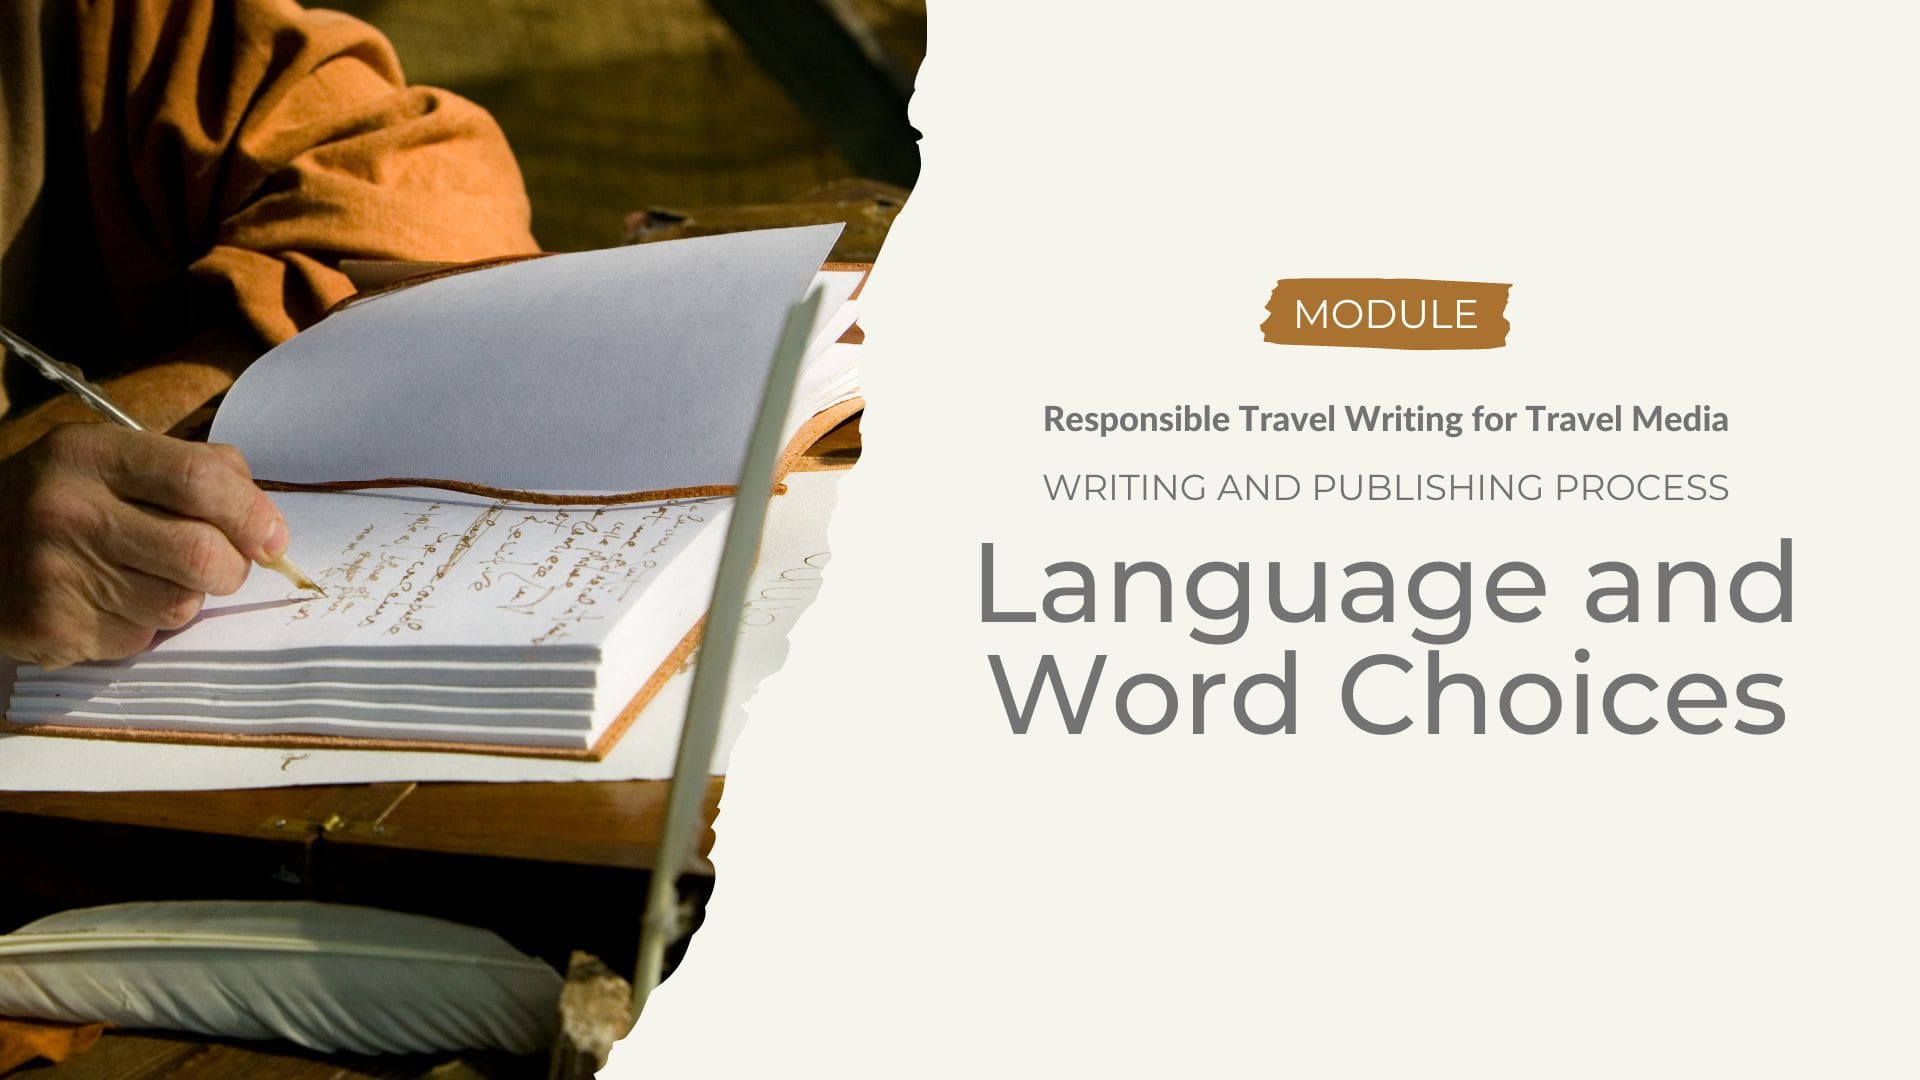 Writing and Publishing Process - Language and Word Choices